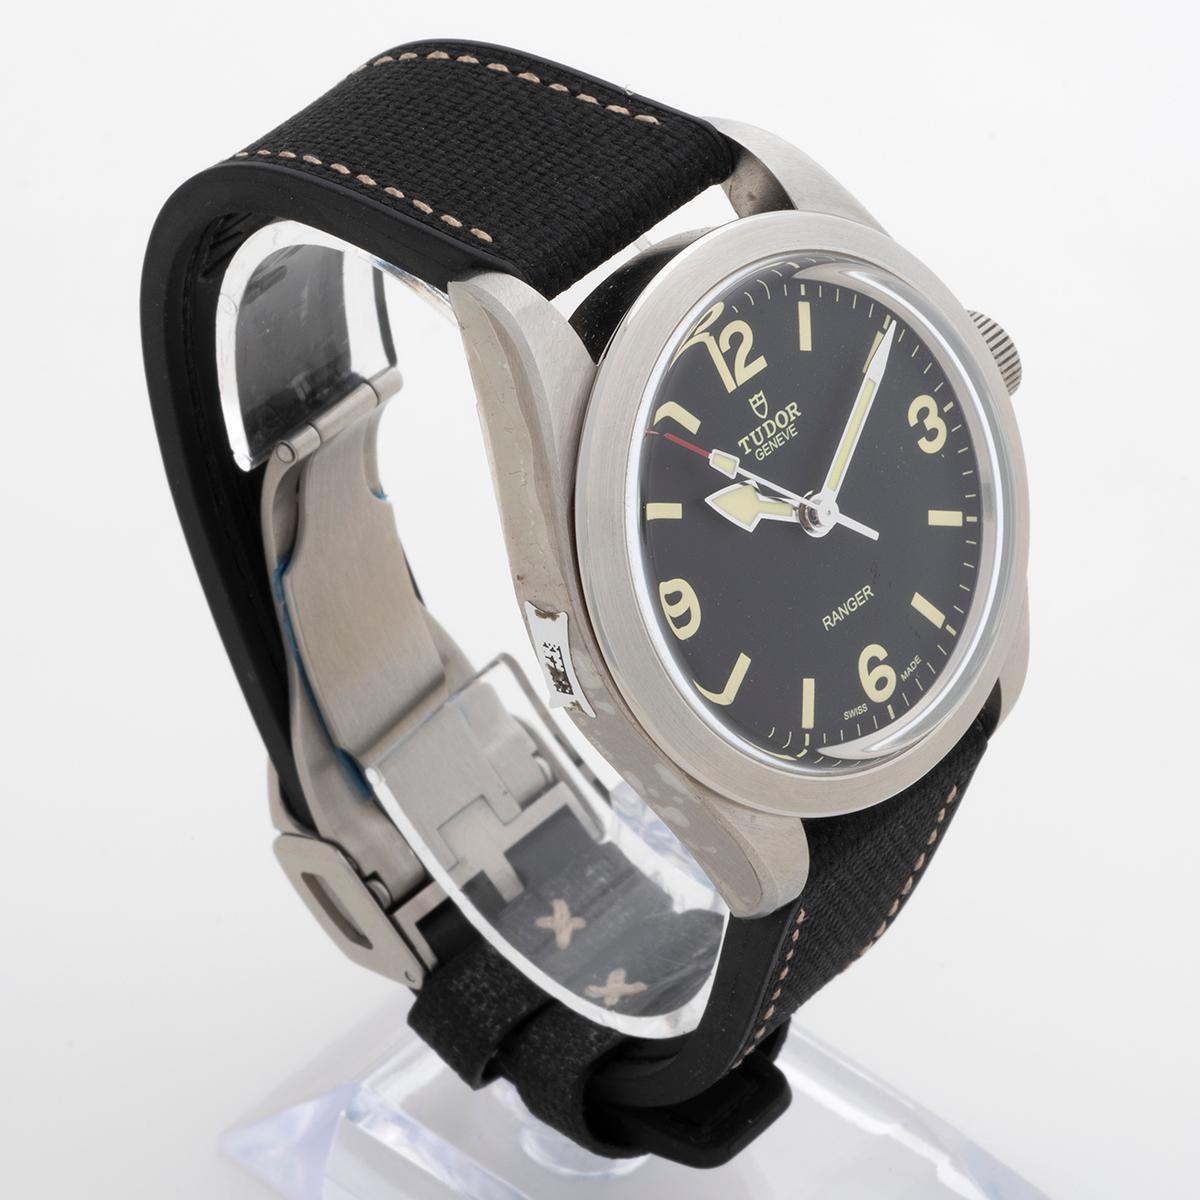 Our Tudor Ranger reference 79950 features a 39mm stainless steel case and hybrid rubber/ leather strap with deployant folding clasp. Presented in near new condition without discernible signs of wear, one case side sticker is attached with bar code